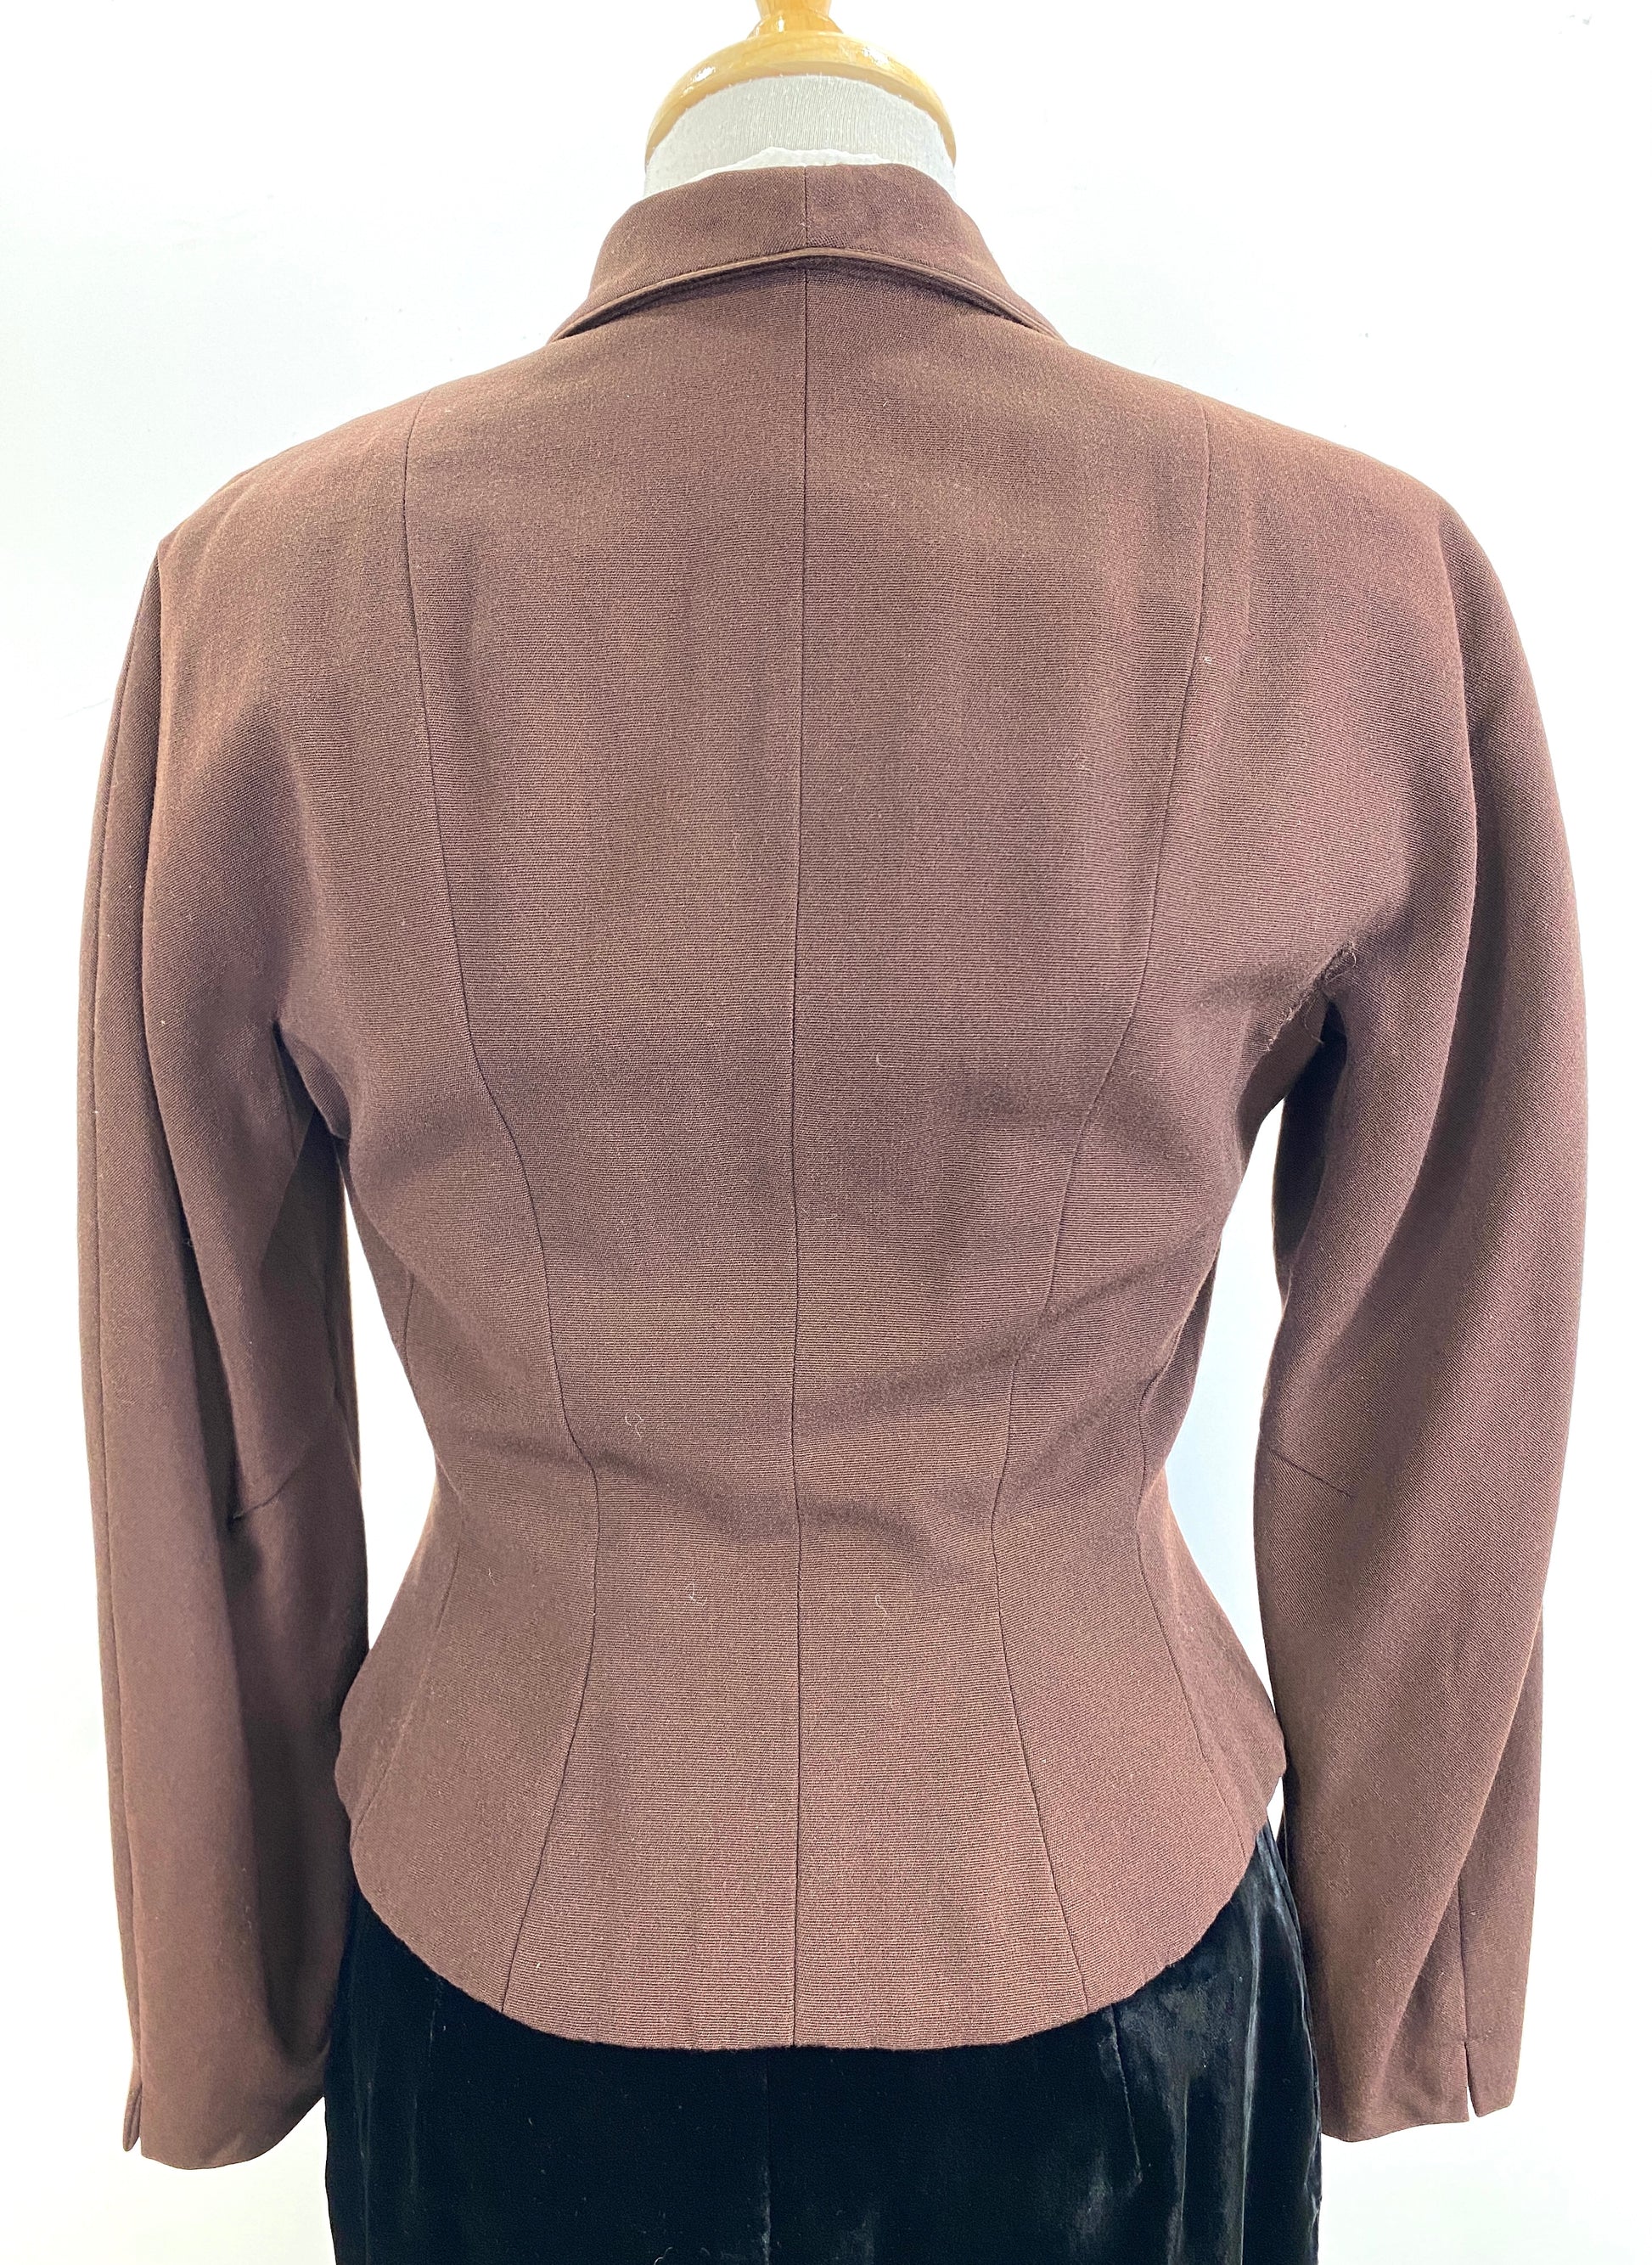 Vintage 1950s Women's Brown Wool Fitted Jacket, Small – Ian